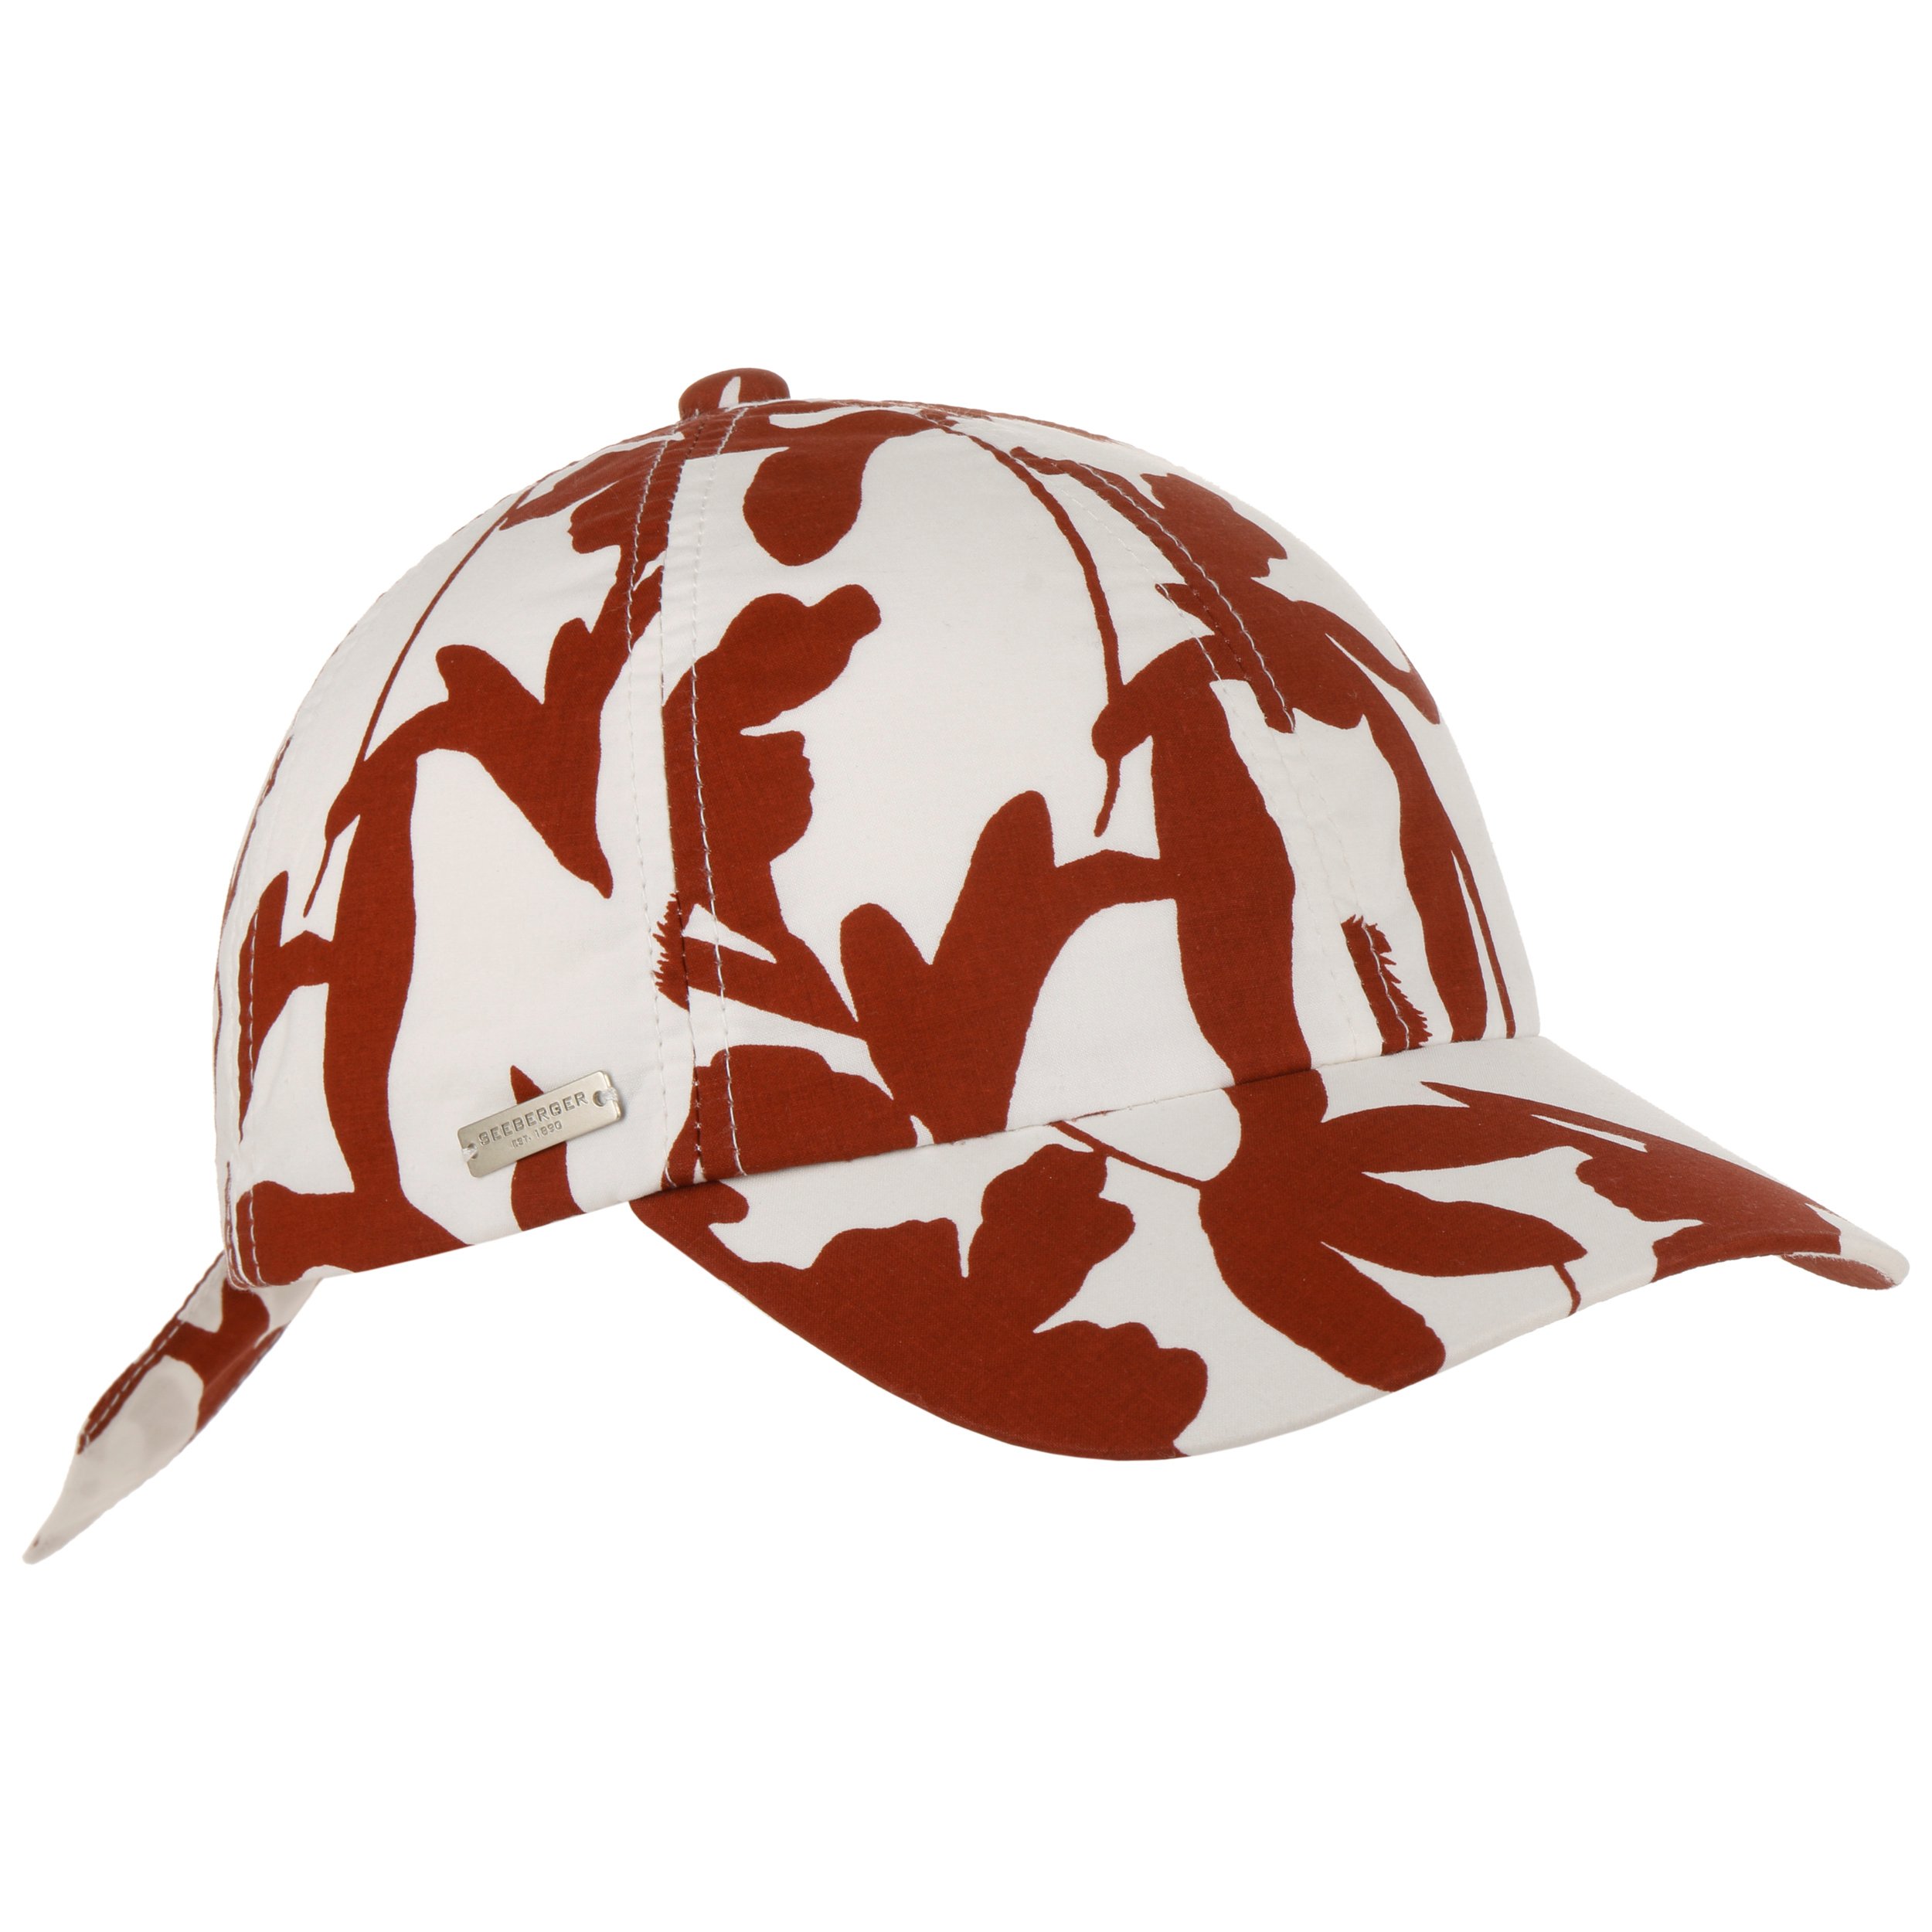 Twotone Flower Cap by Seeberger - 29,95 €